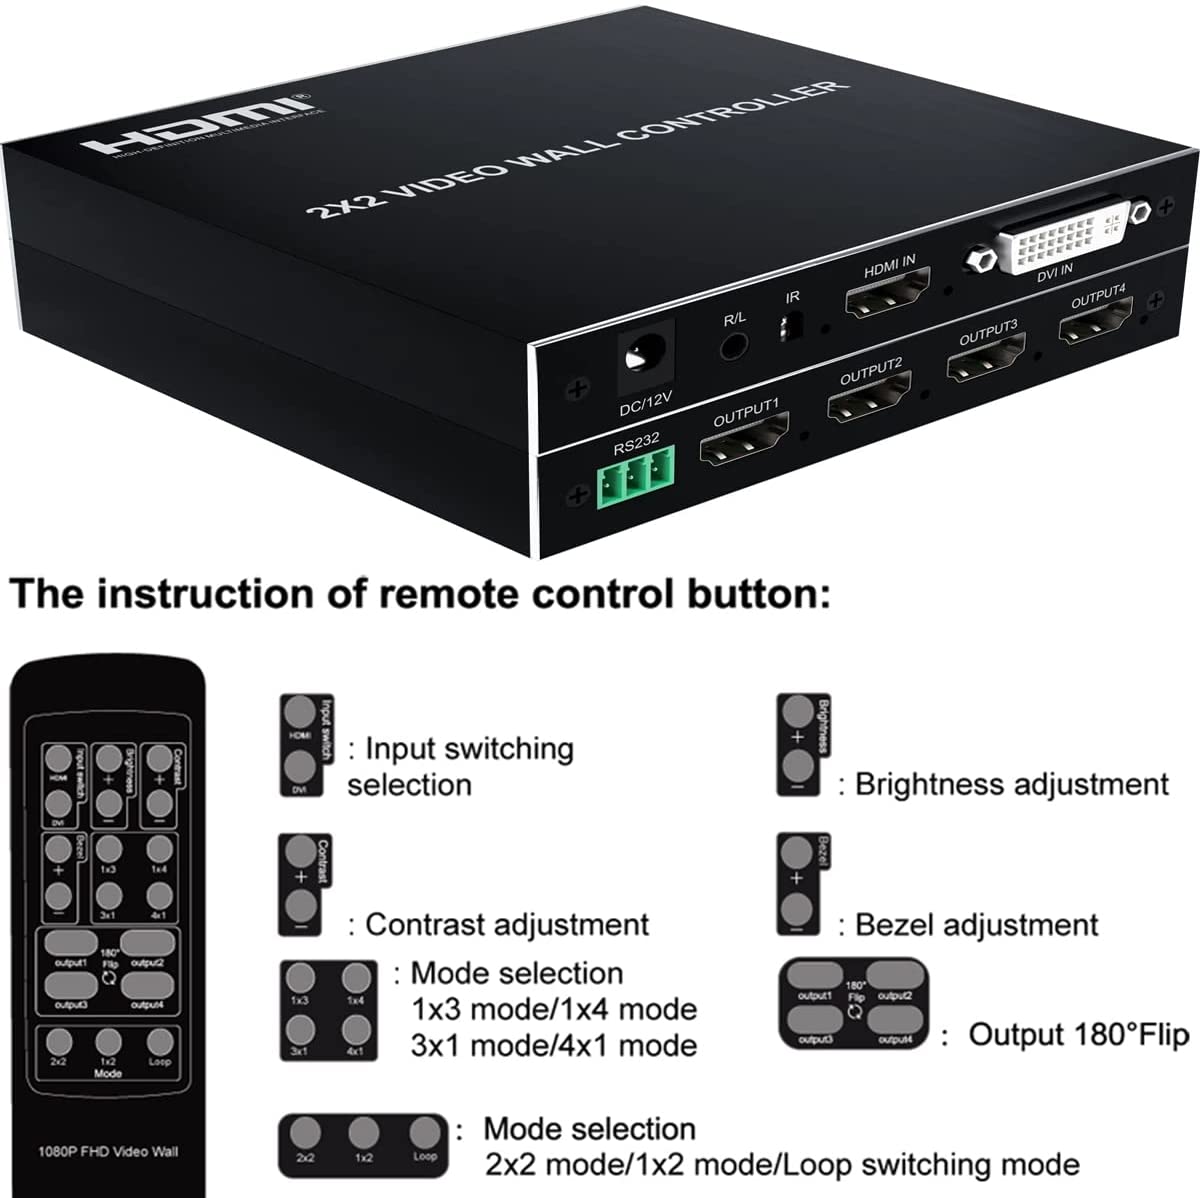 HF-VWC22A: 2x2 Video Wall Controller, 1080P@60HZ HD Display, 180 Degree Rotate, 8 Display Modes - 2x2, 1x2, 1x3, 1x4, 2x1, 3x1, 4x1,1 HDMI/DVI Input 4 HDMI Output with RS232 Control - Click Image to Close